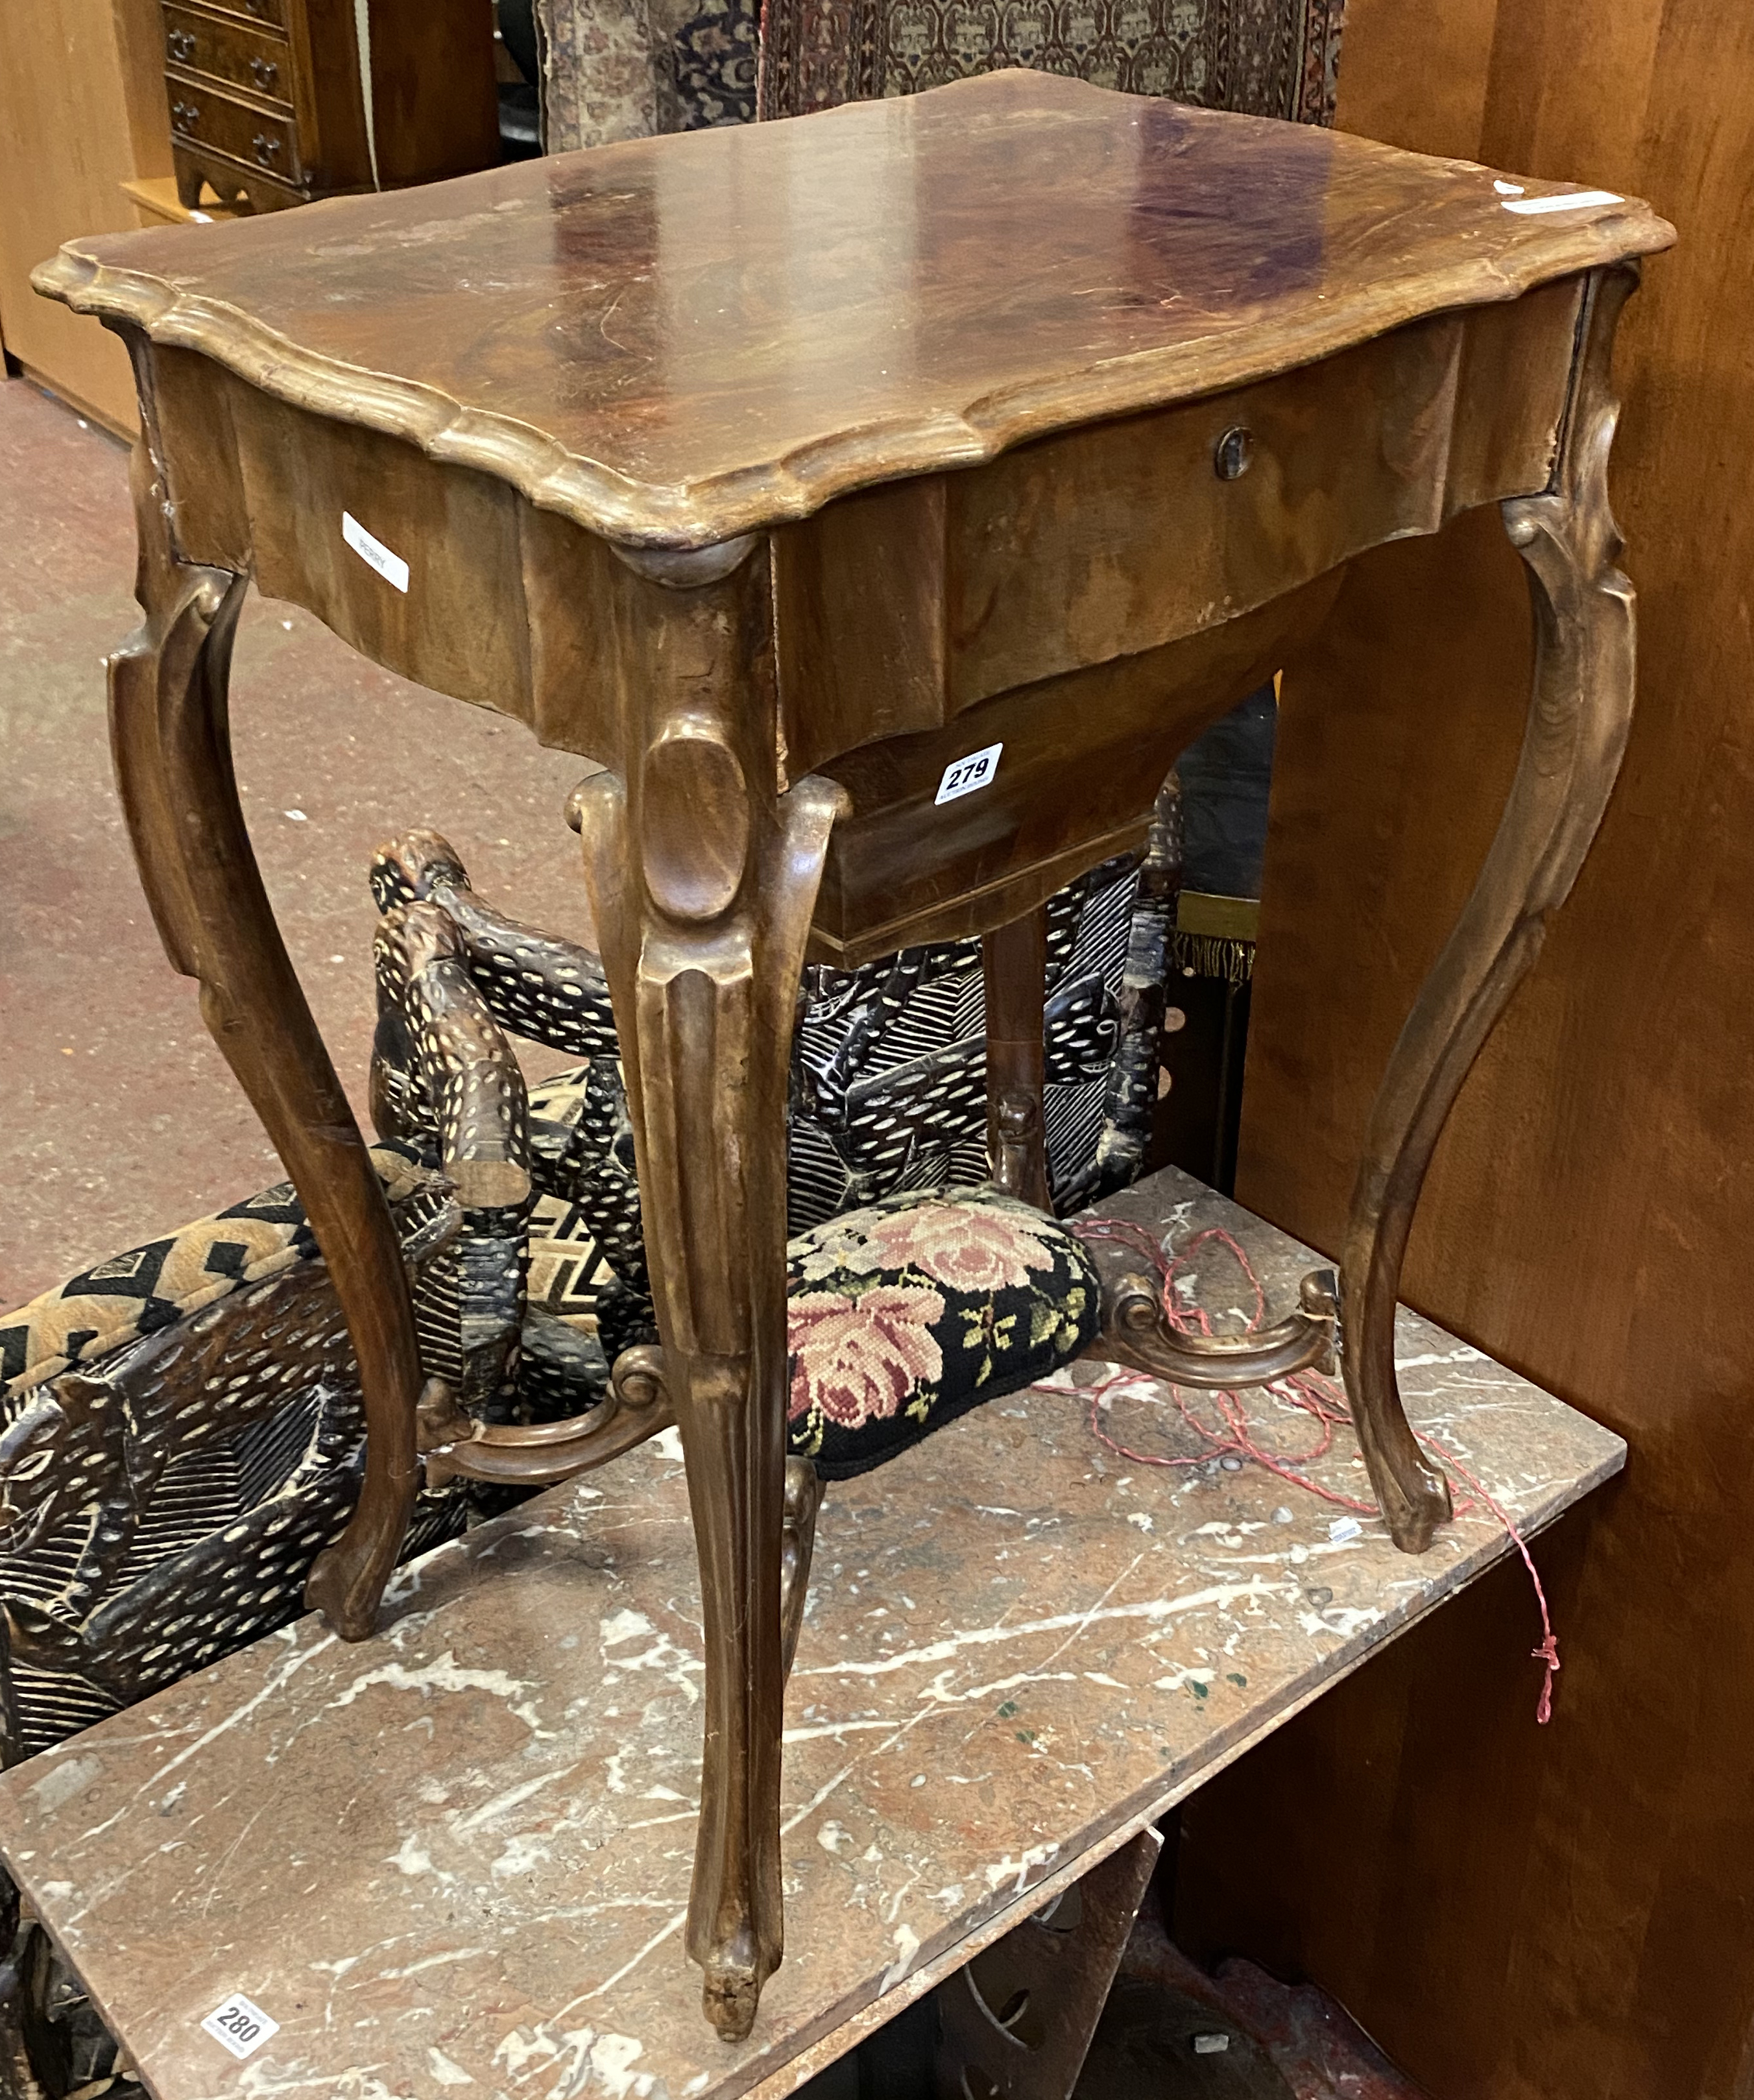 VICTORIAN SEWING TABLE - A/F